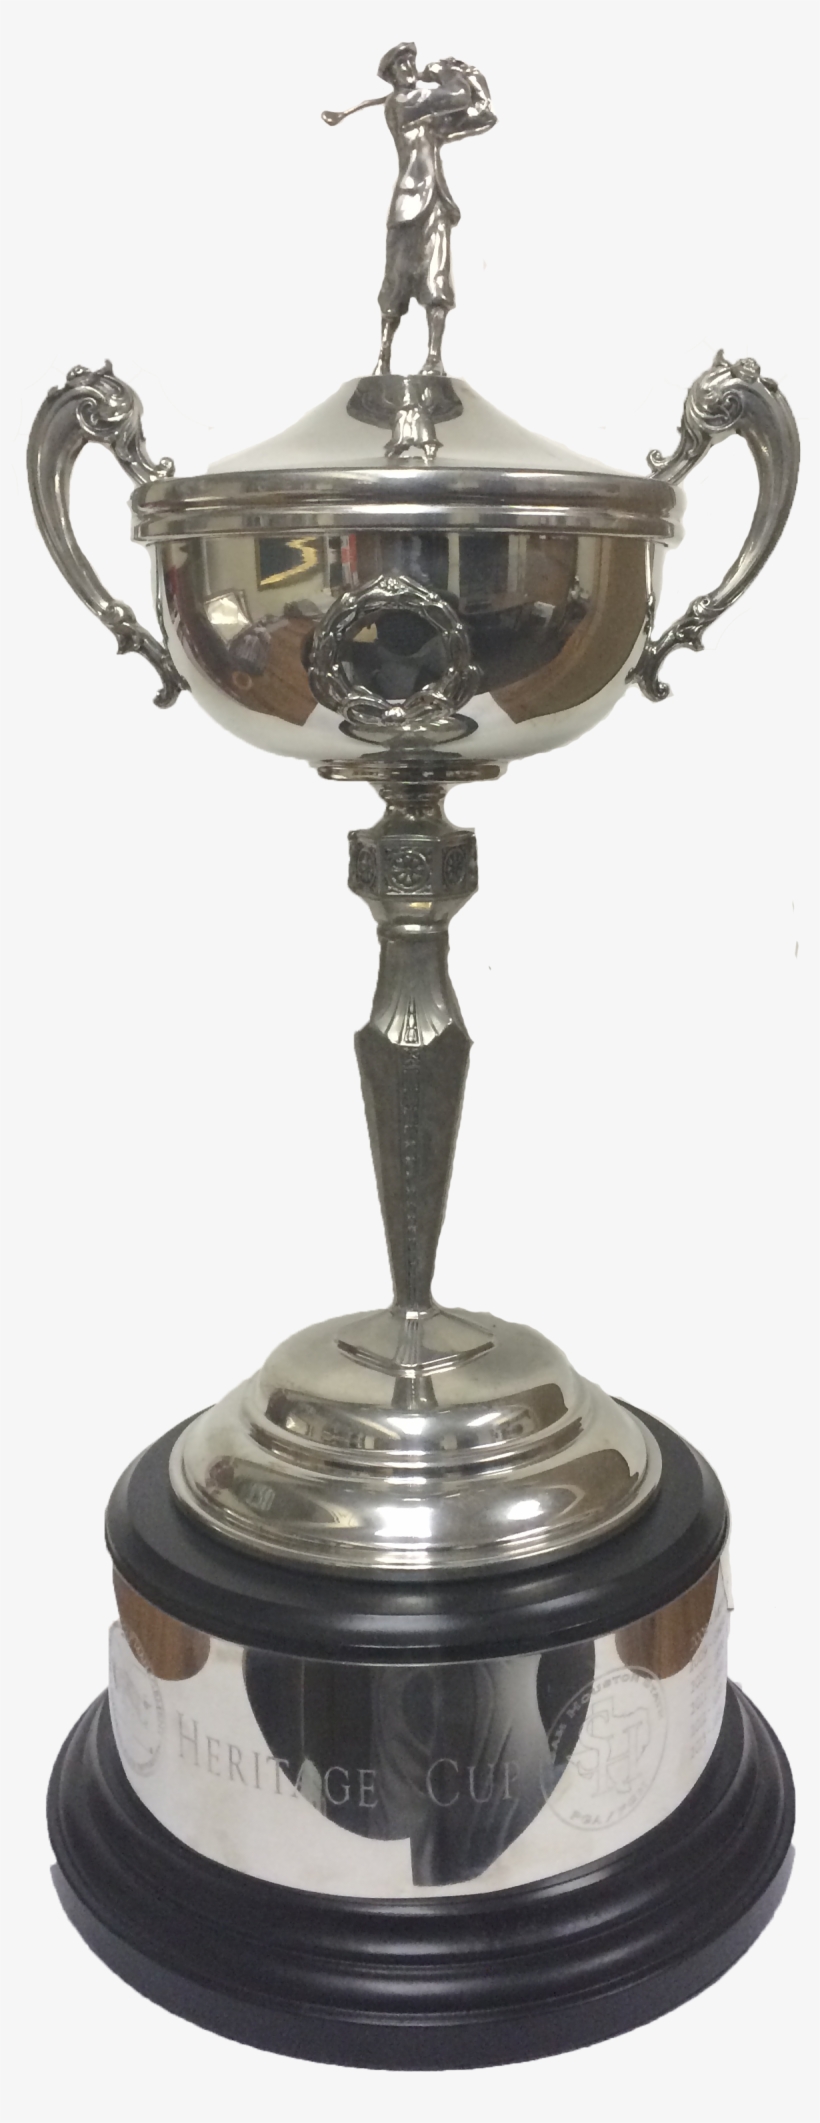 Heritage Cup Png - Heritage Cup, transparent png #2364142